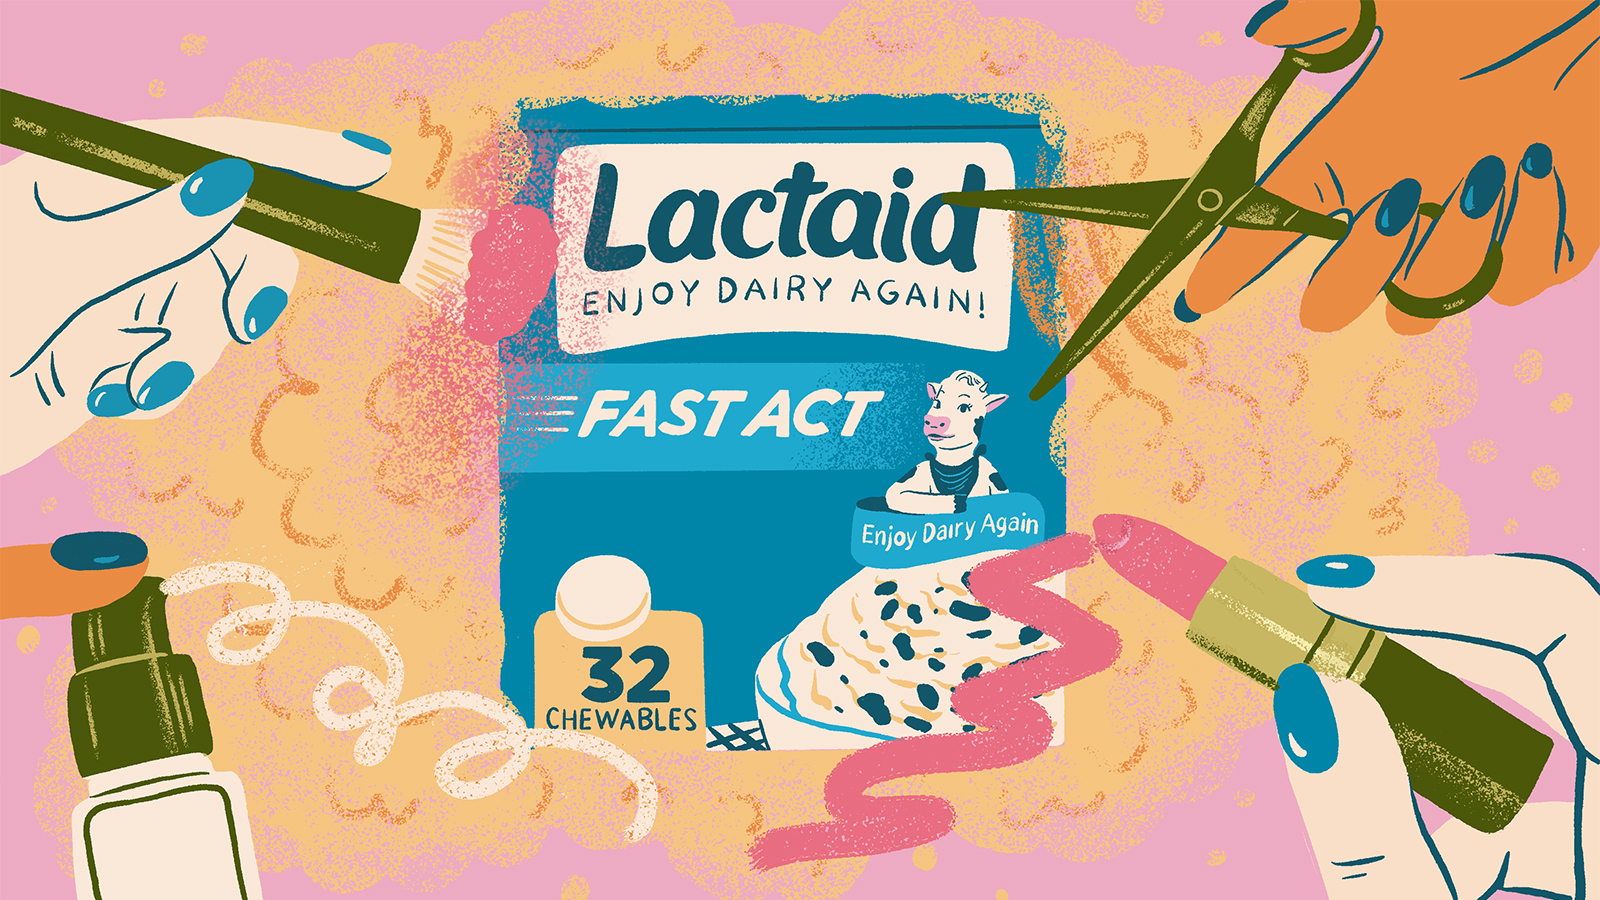 Hands holding a makeup brush, scissors, lipstick, and a spray bottle surround a box of Lactaid. Illustration.